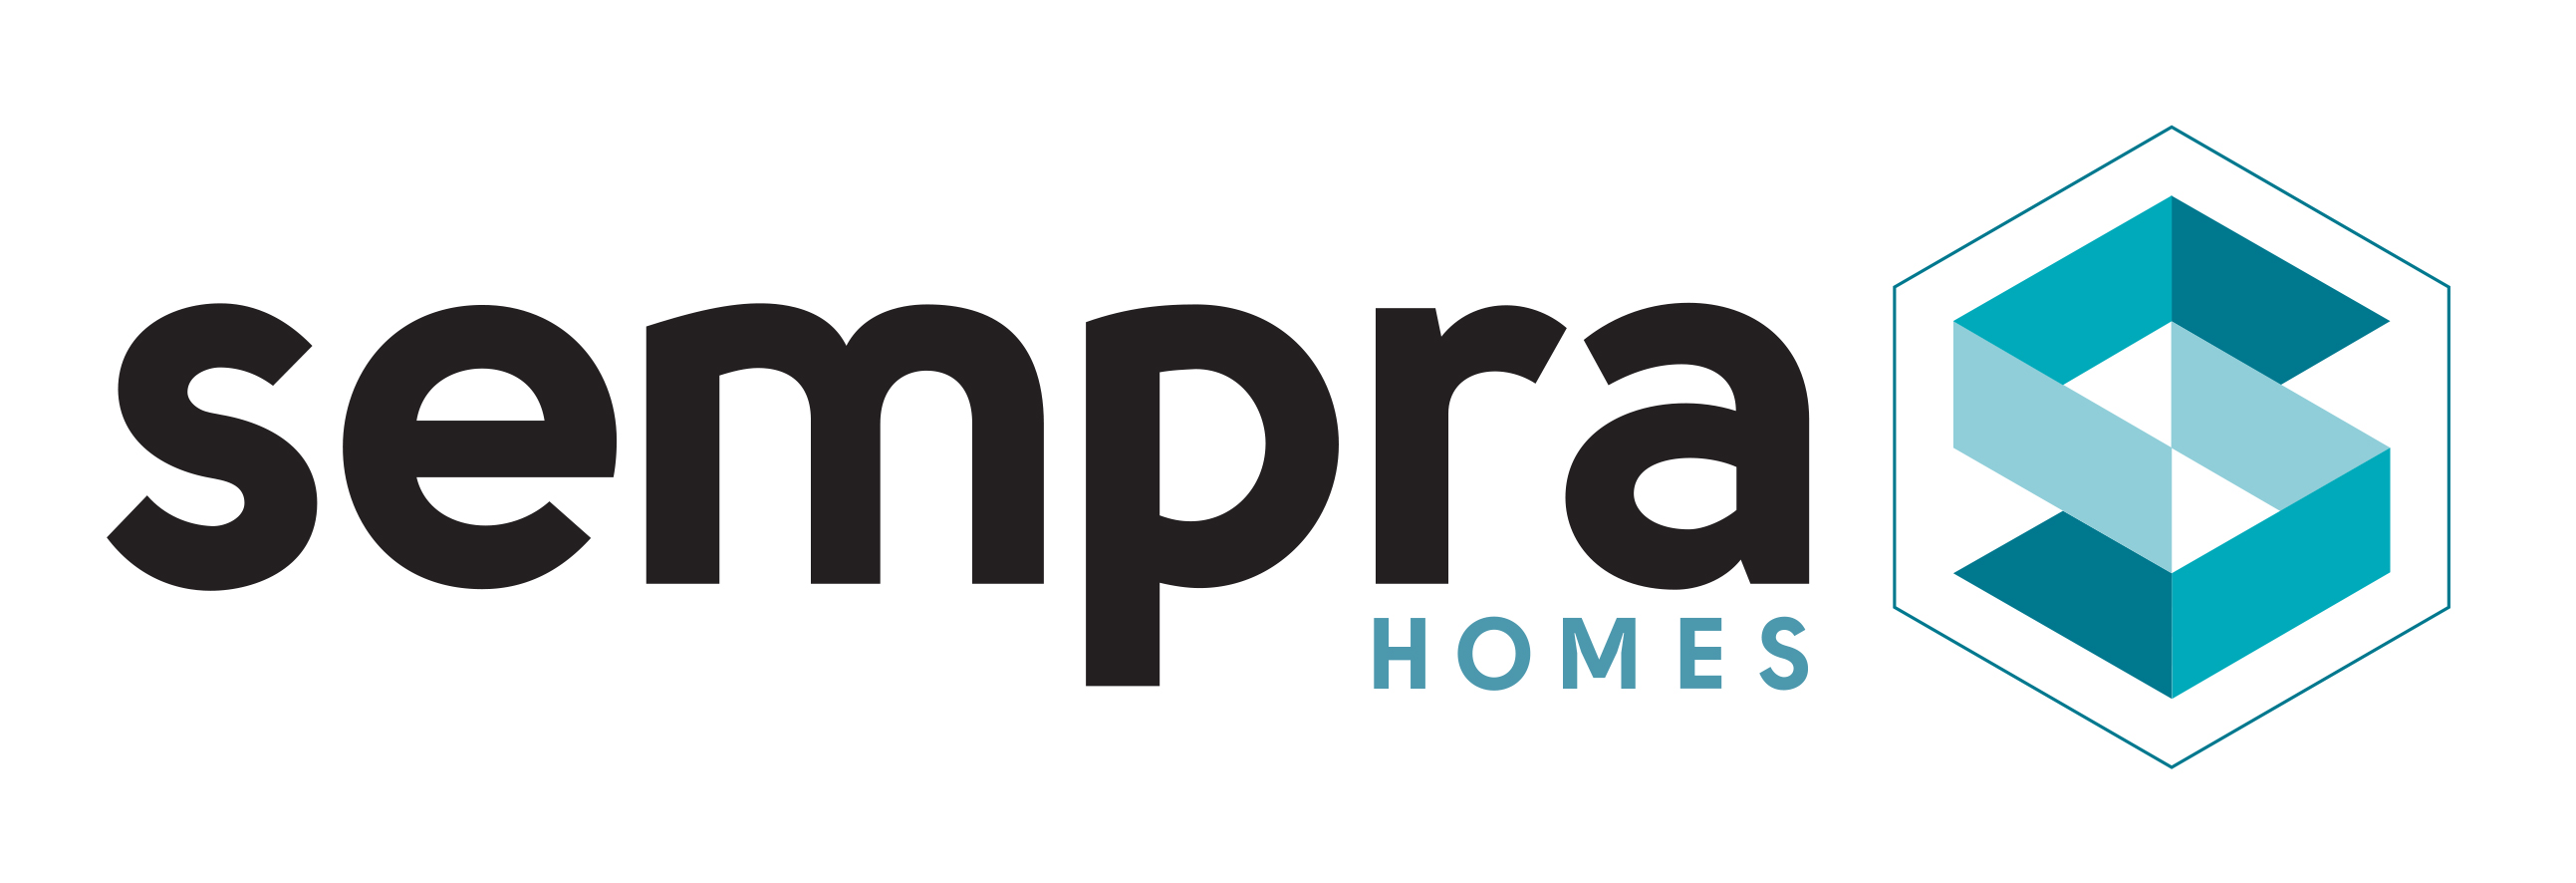 About Sempra Homes Image